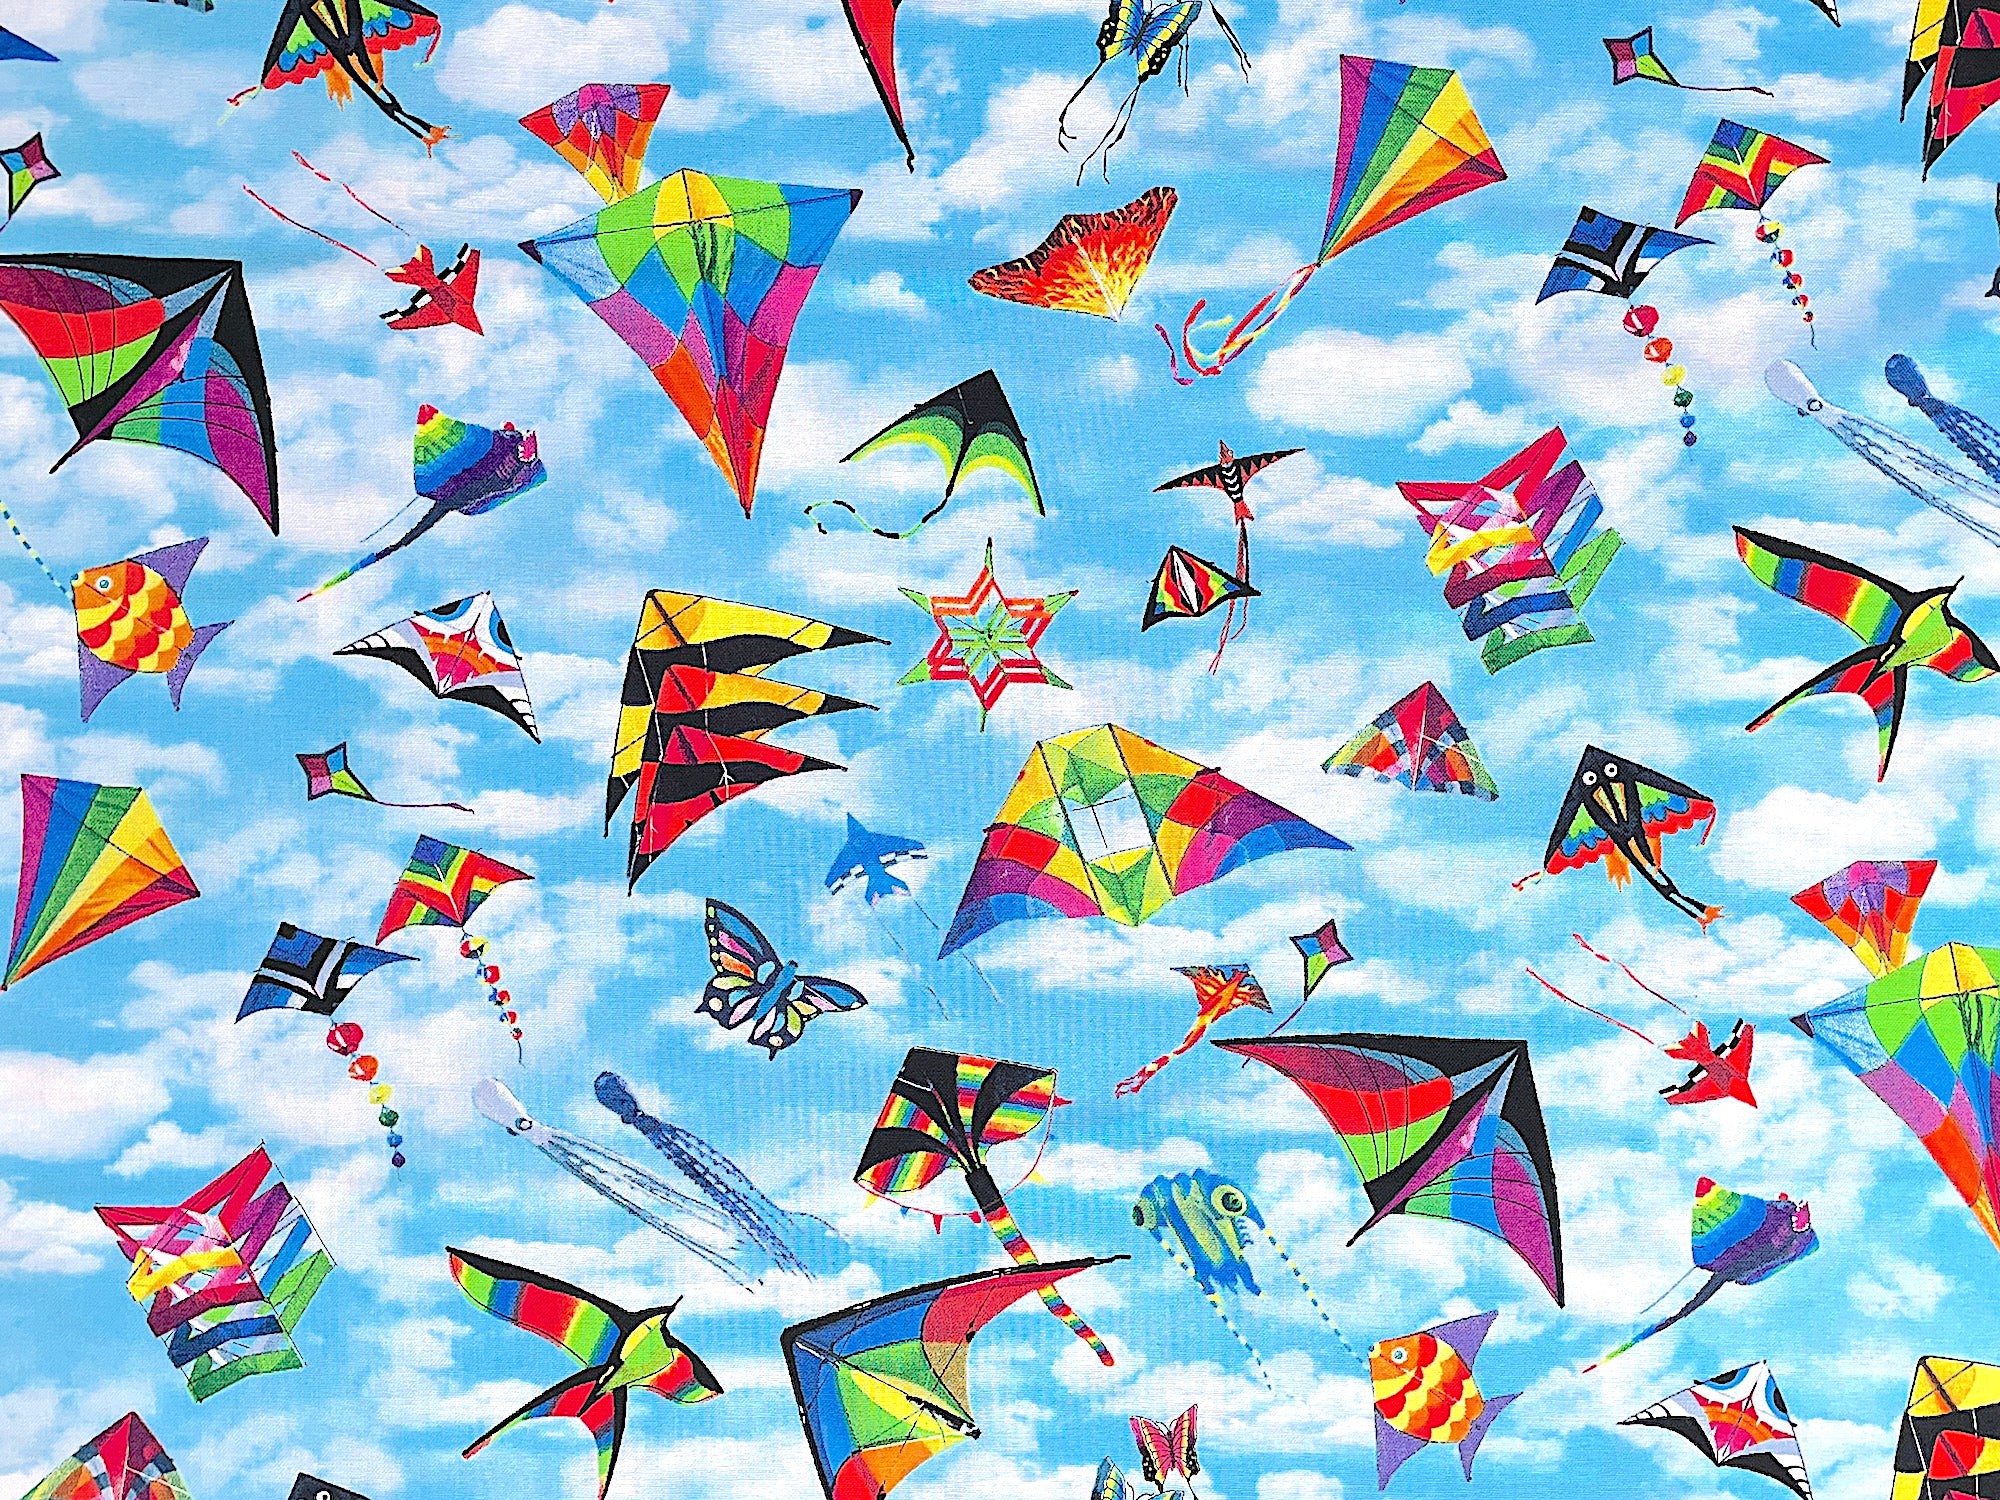 Cotton fabric covered with colorful kites.